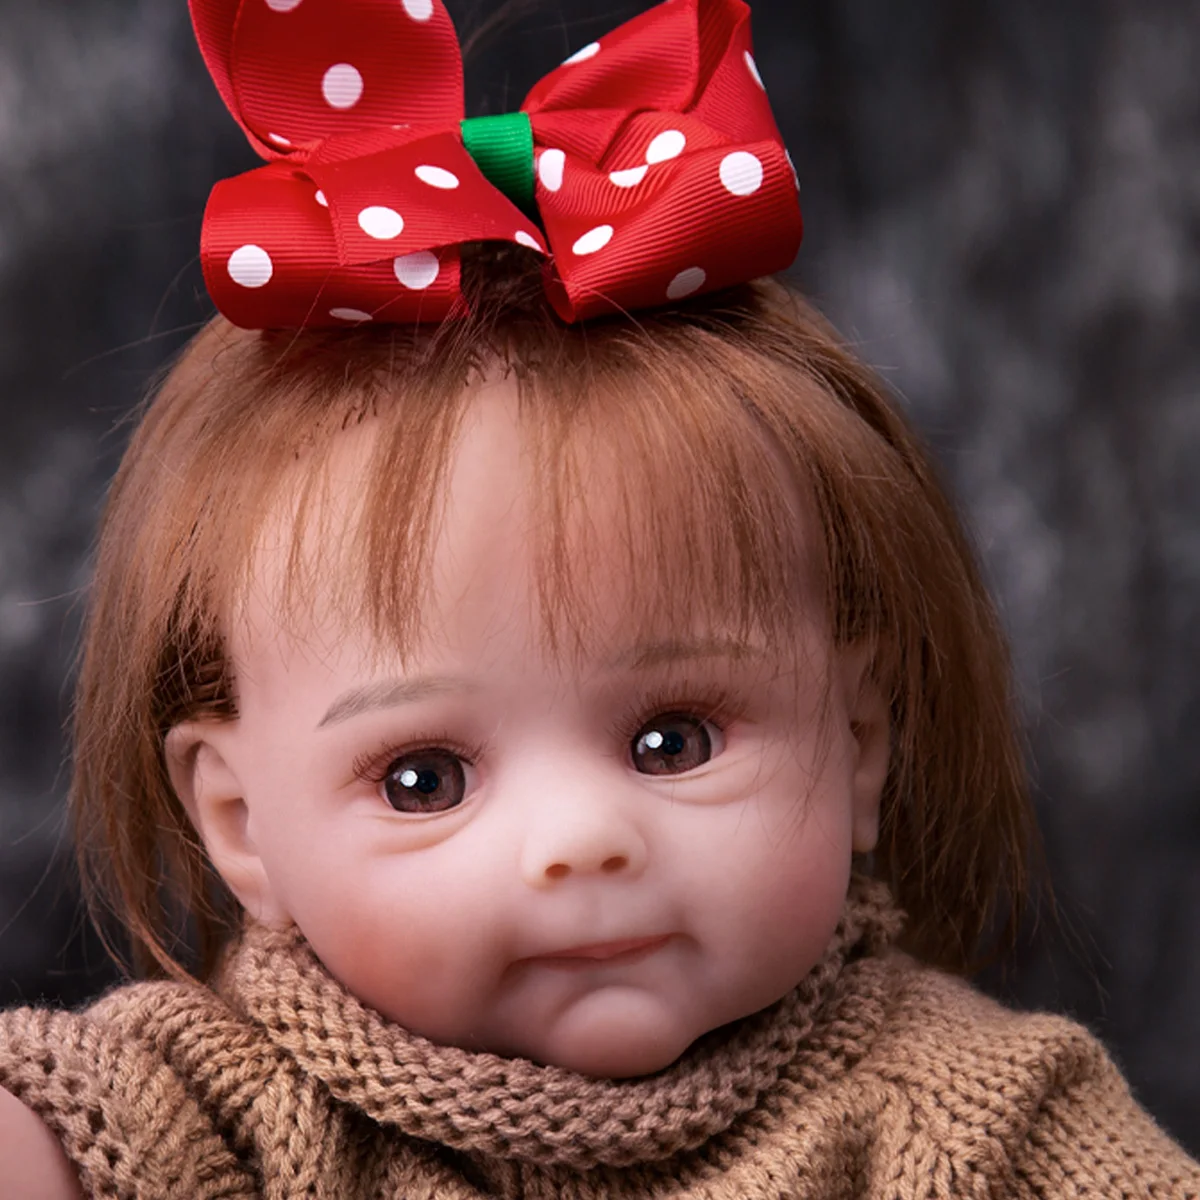 

KEIUMI Popular Unfinished Reborn Doll Kit 20 Inch Silicone Vinyl Blank Unpainted Bebe Doll Part Accessories DIY Blank Doll Kit